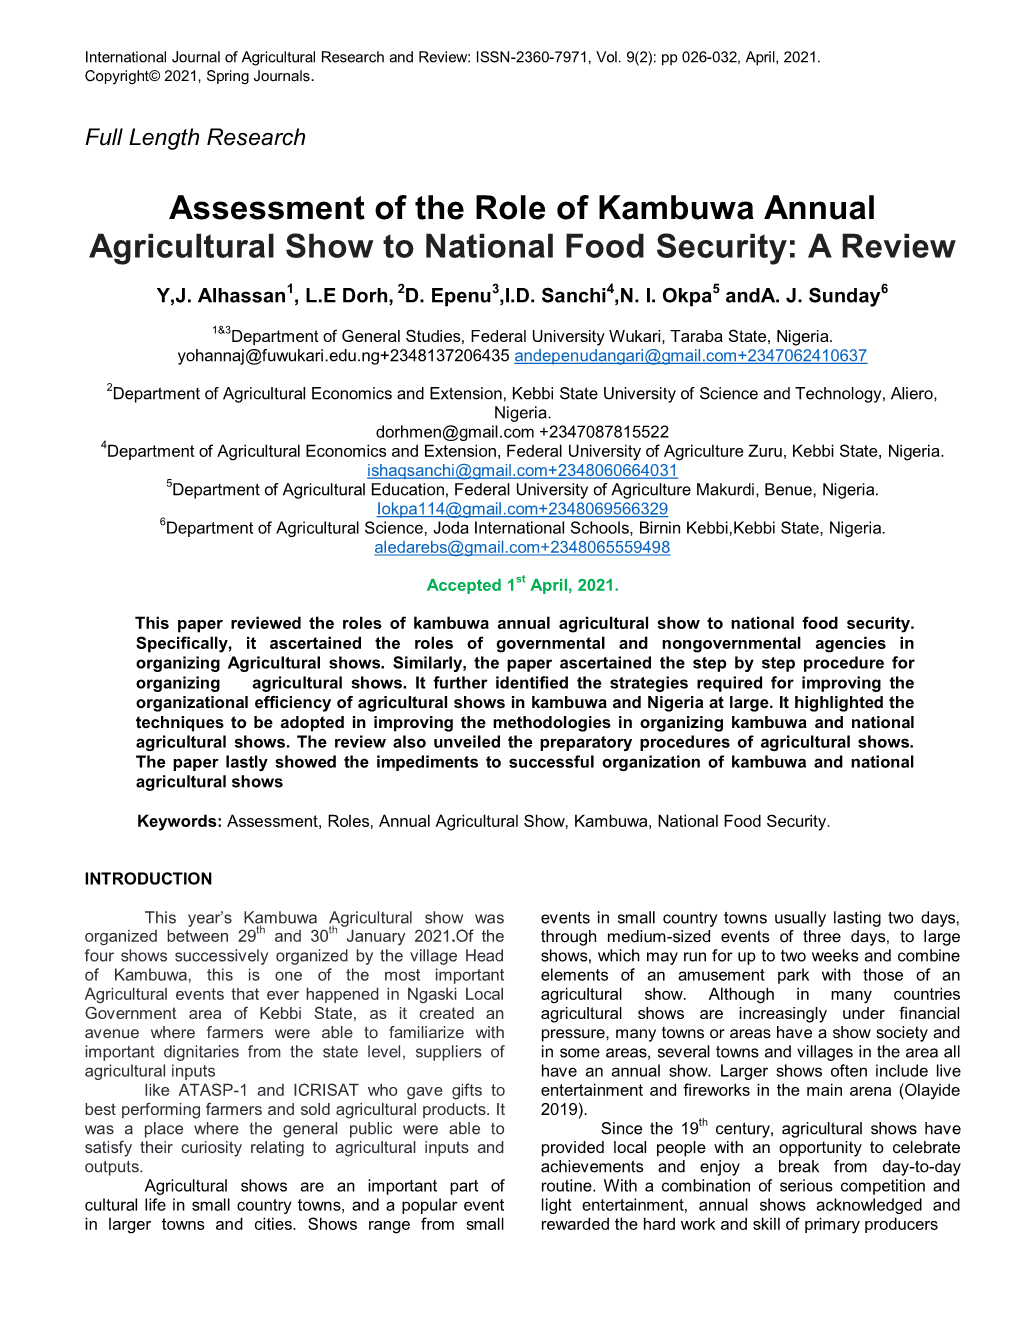 Assessment of the Role of Kambuwa Annual Agricultural Show to National Food Security: a Review